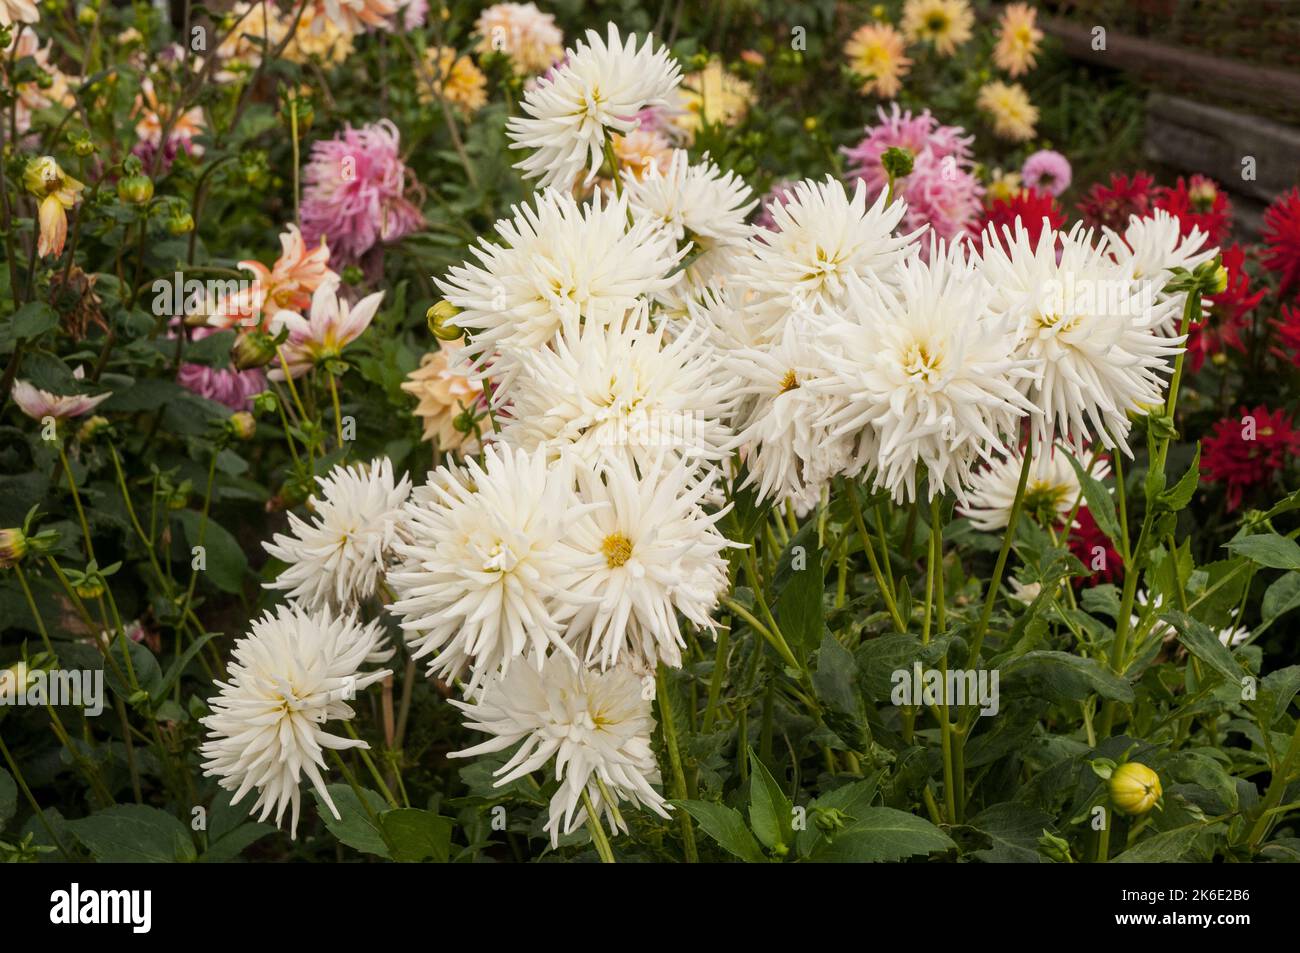 A group of Non -disbudded Chrysanthemum / Dendranthema Charles Tandy a white intermediate that flowers in early autumnChrysant Stock Photo